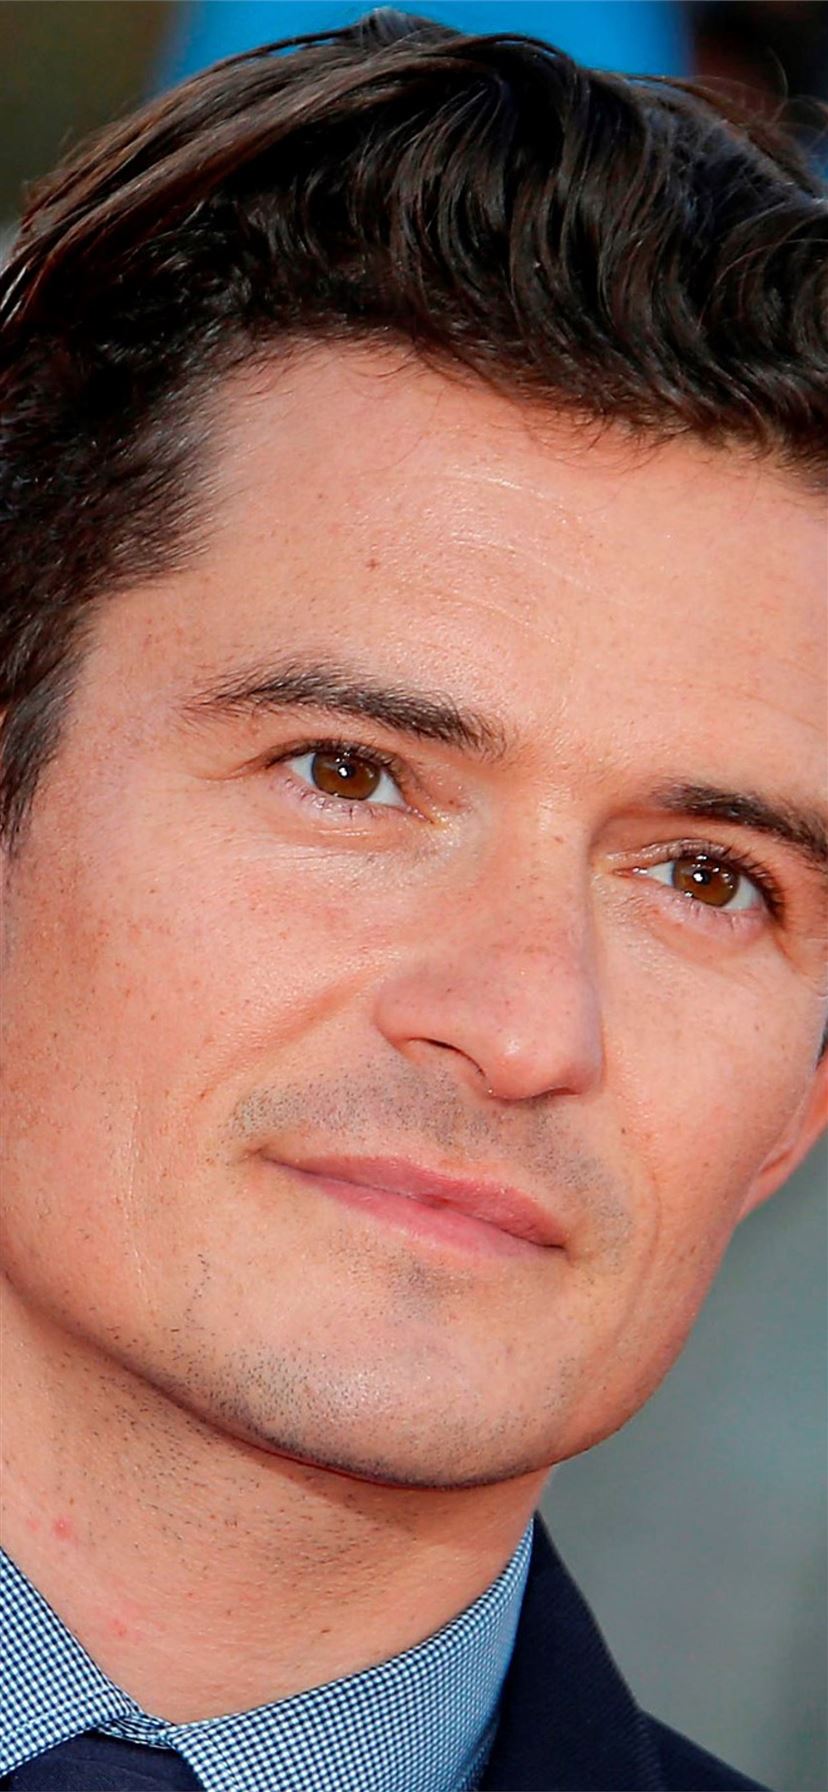 orlando bloom iPhone Wallpapers Free Download